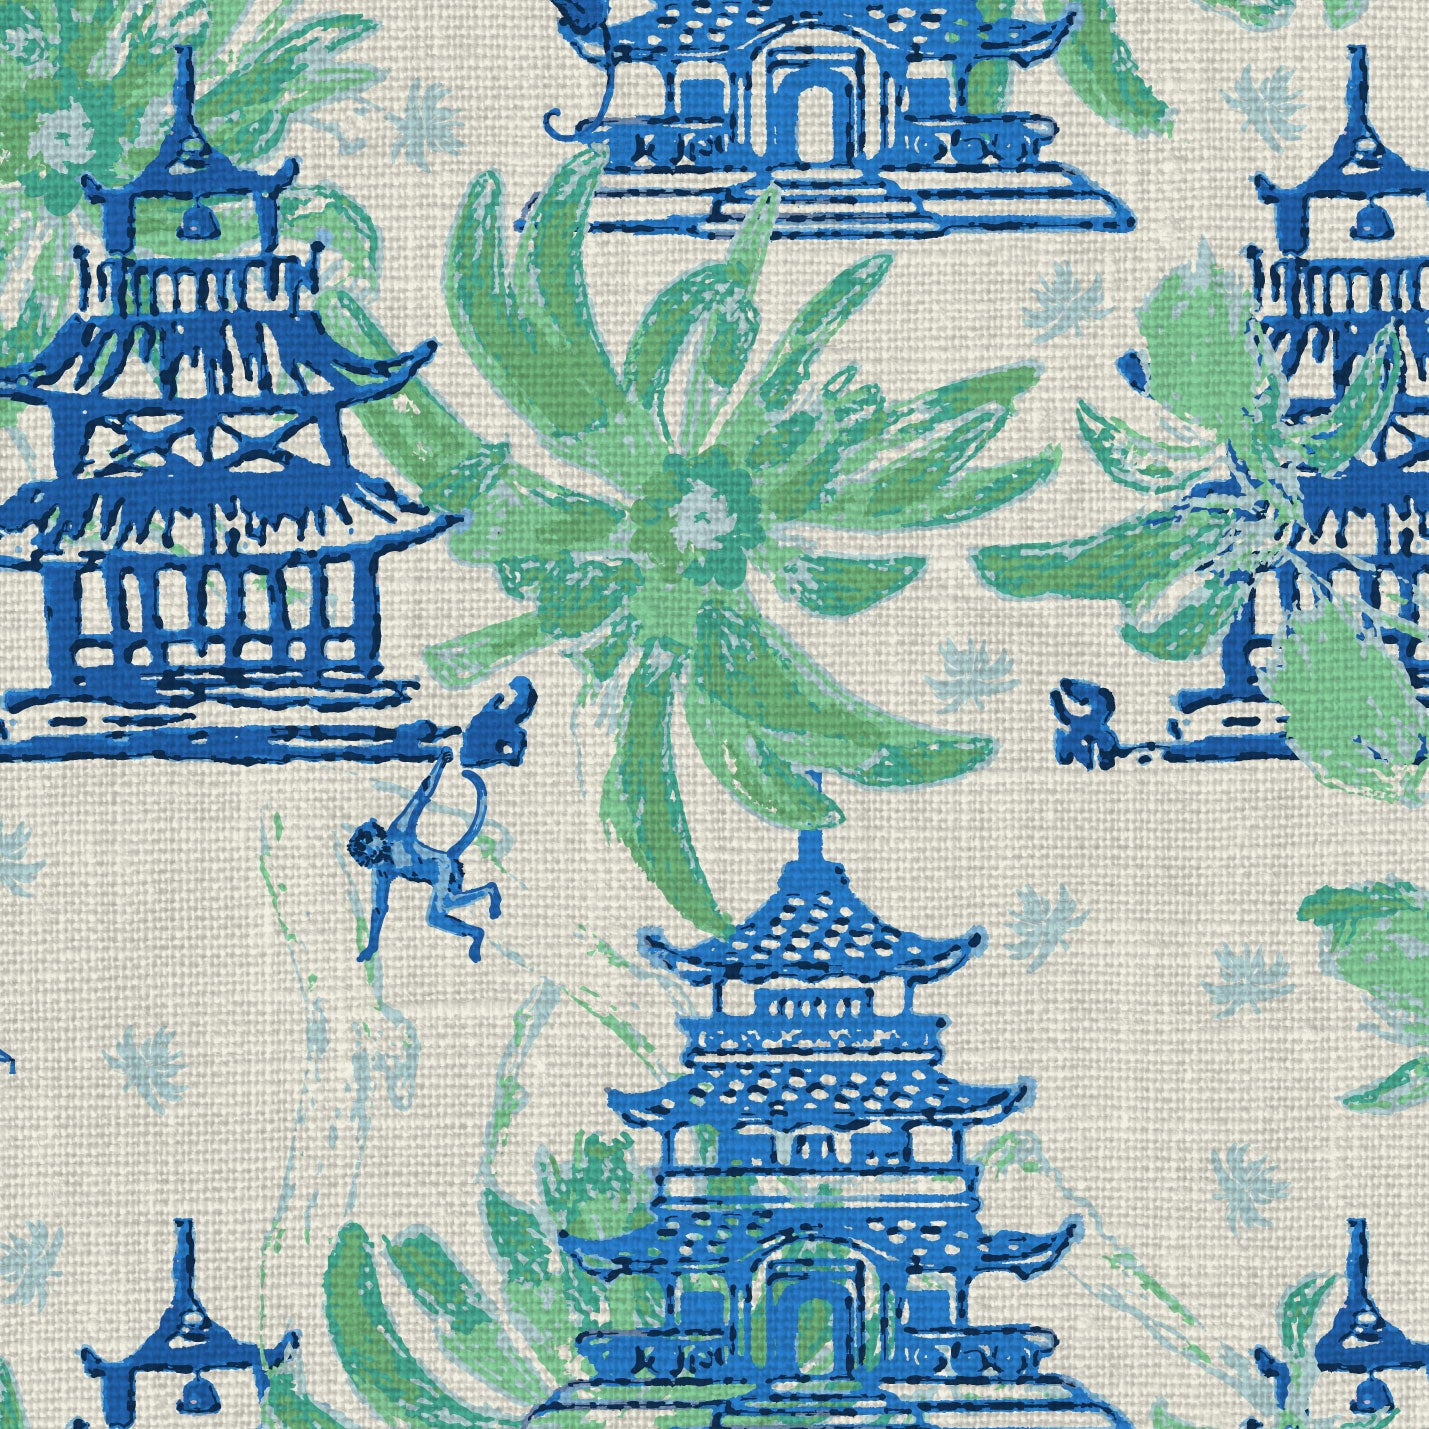 Natural Textured Eco-Friendly Non-toxic High-quality Sustainable practices Sustainability Wall covering Wallcovering Wallpaper luxury bespoke custom interior design asian inspired green palm leaf garden print floral tree branches pagoda shades of blue french blue monkey retro chic grid Chinoiserie chinese classic chintz french blue green linen